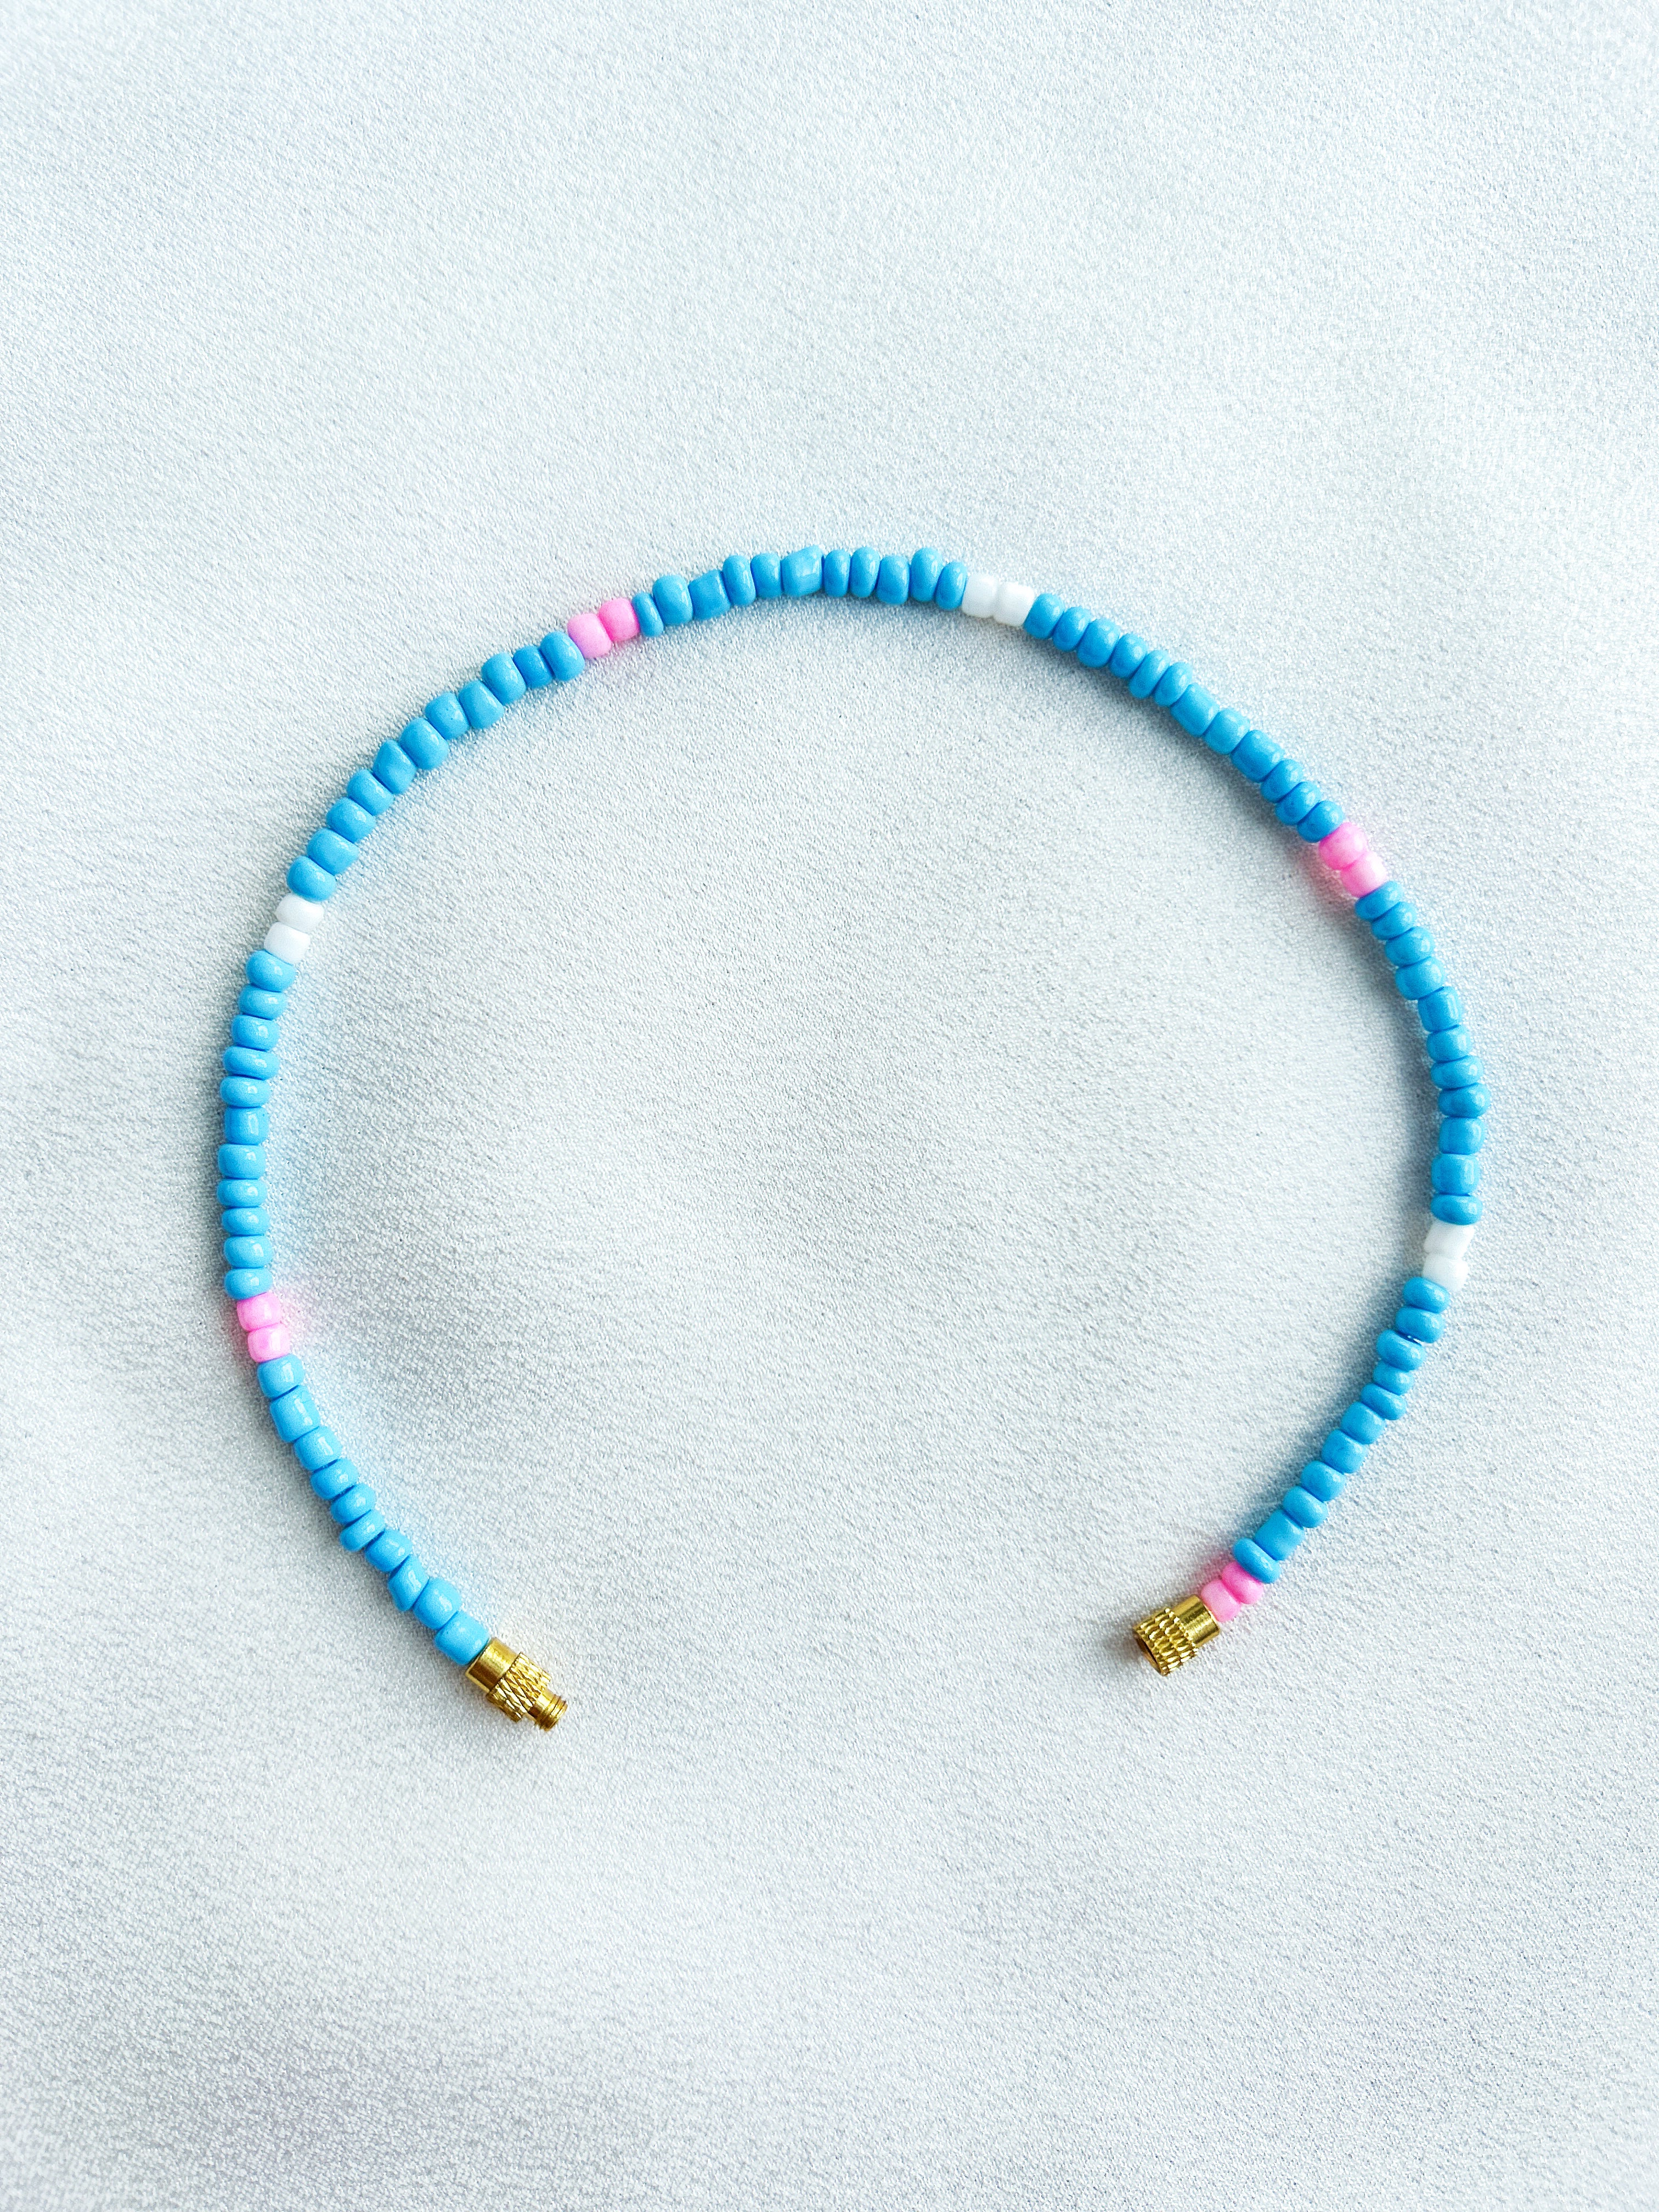 [THE ELEVEN] Anklet/Bracelet: Blue/Pink + White [Small Beads]